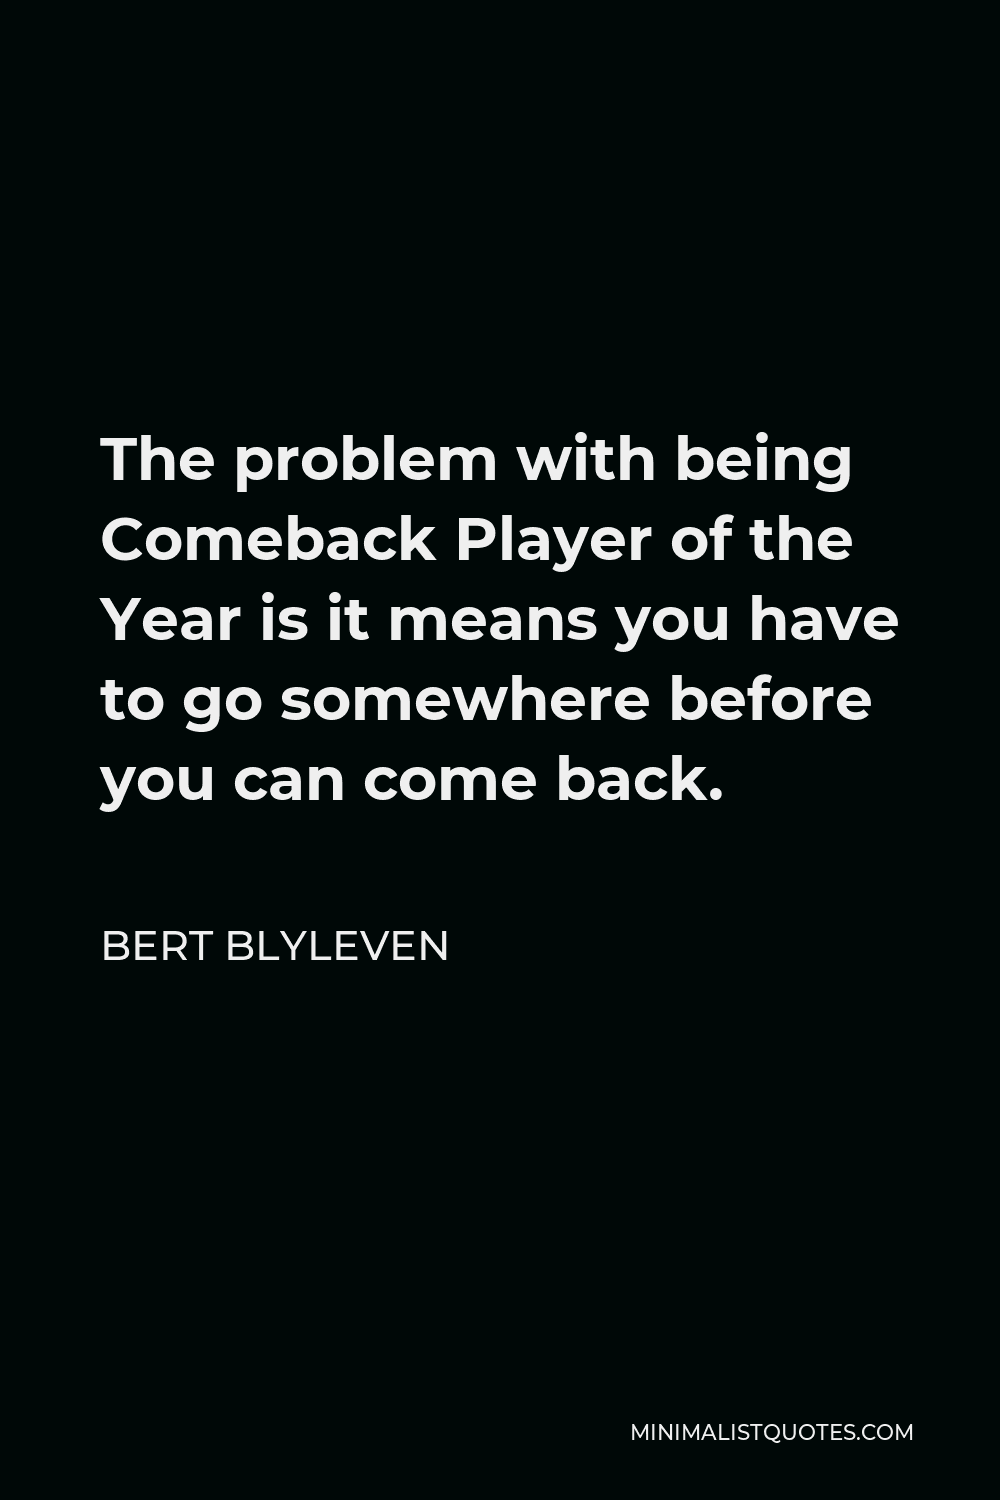 Bert Blyleven Quote - The problem with being Comeback Player of the Year is it means you have to go somewhere before you can come back.